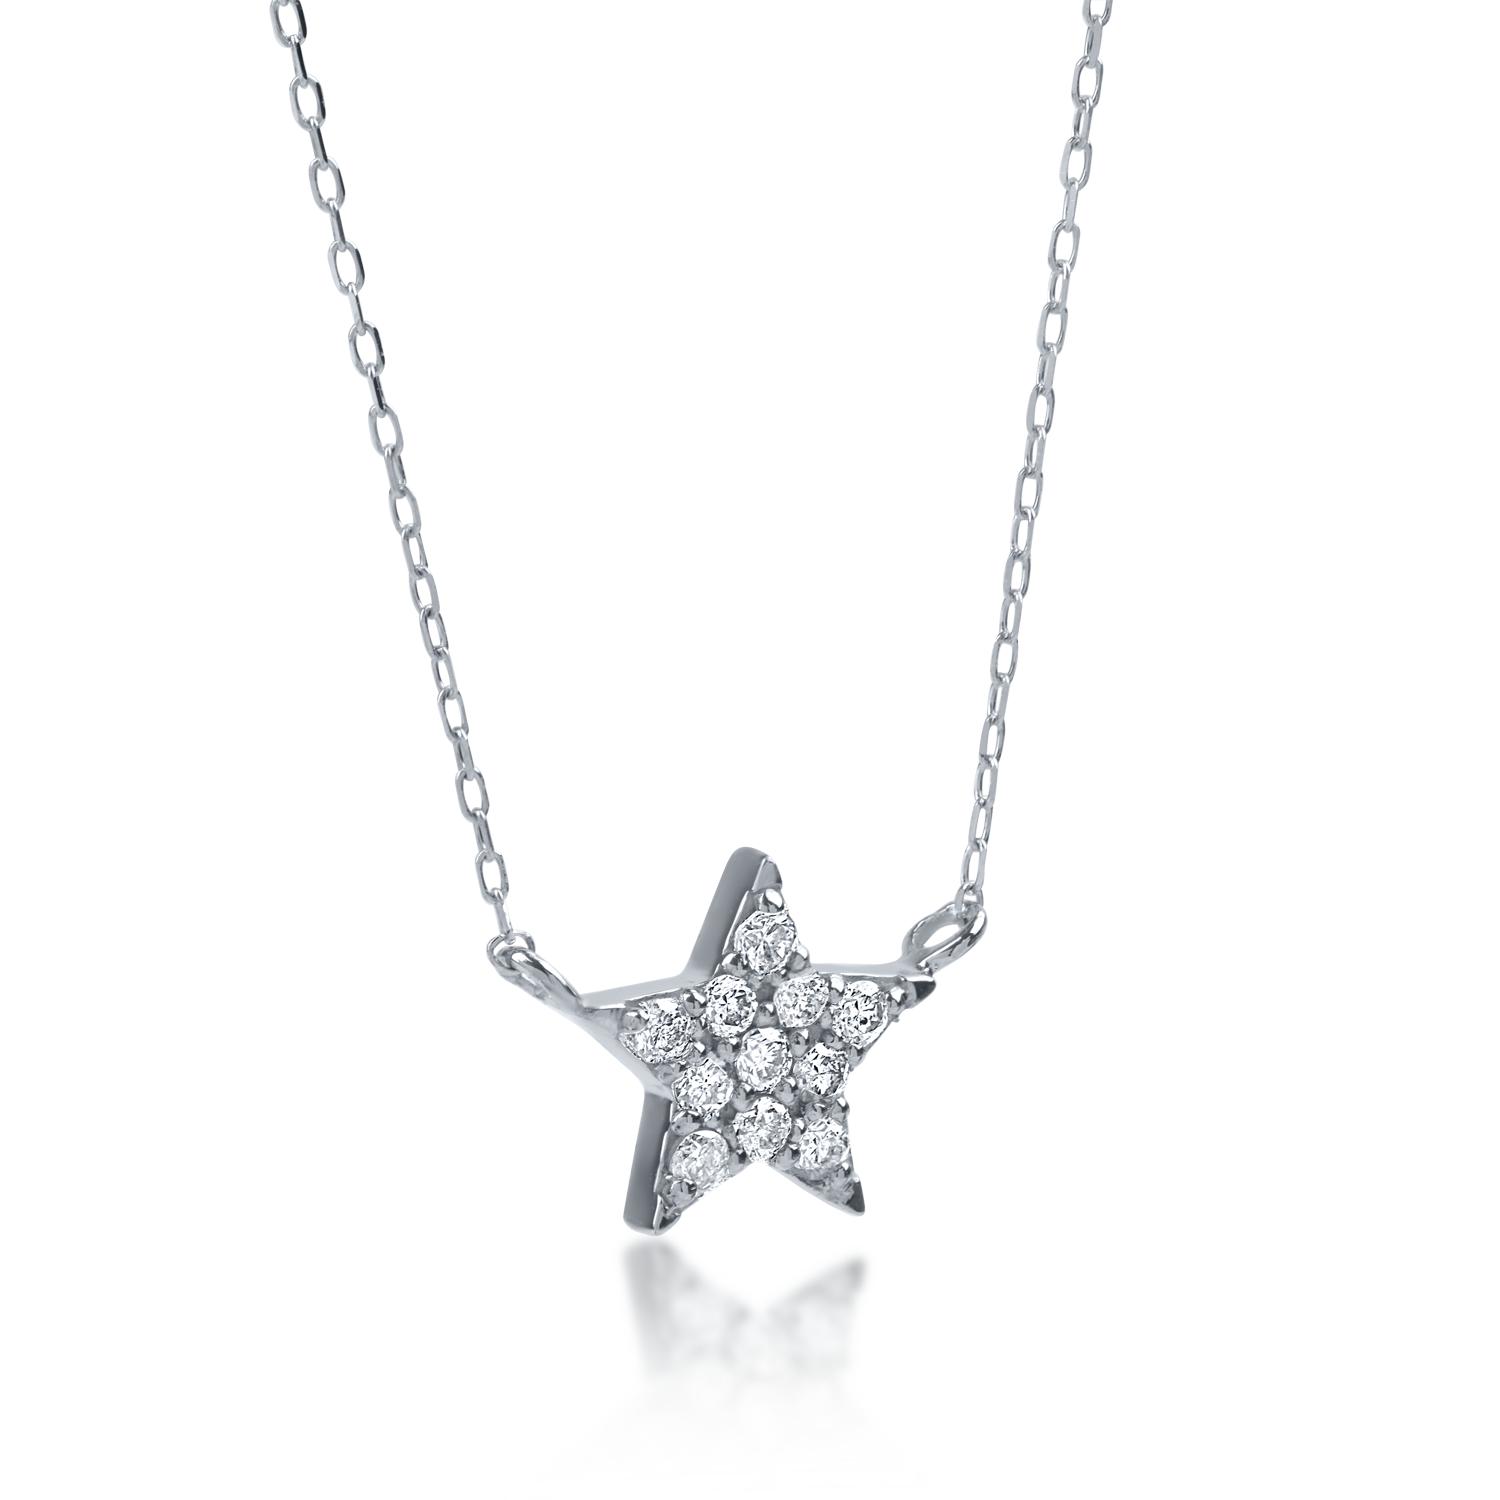 White gold pendant necklace with 0.1ct diamonds